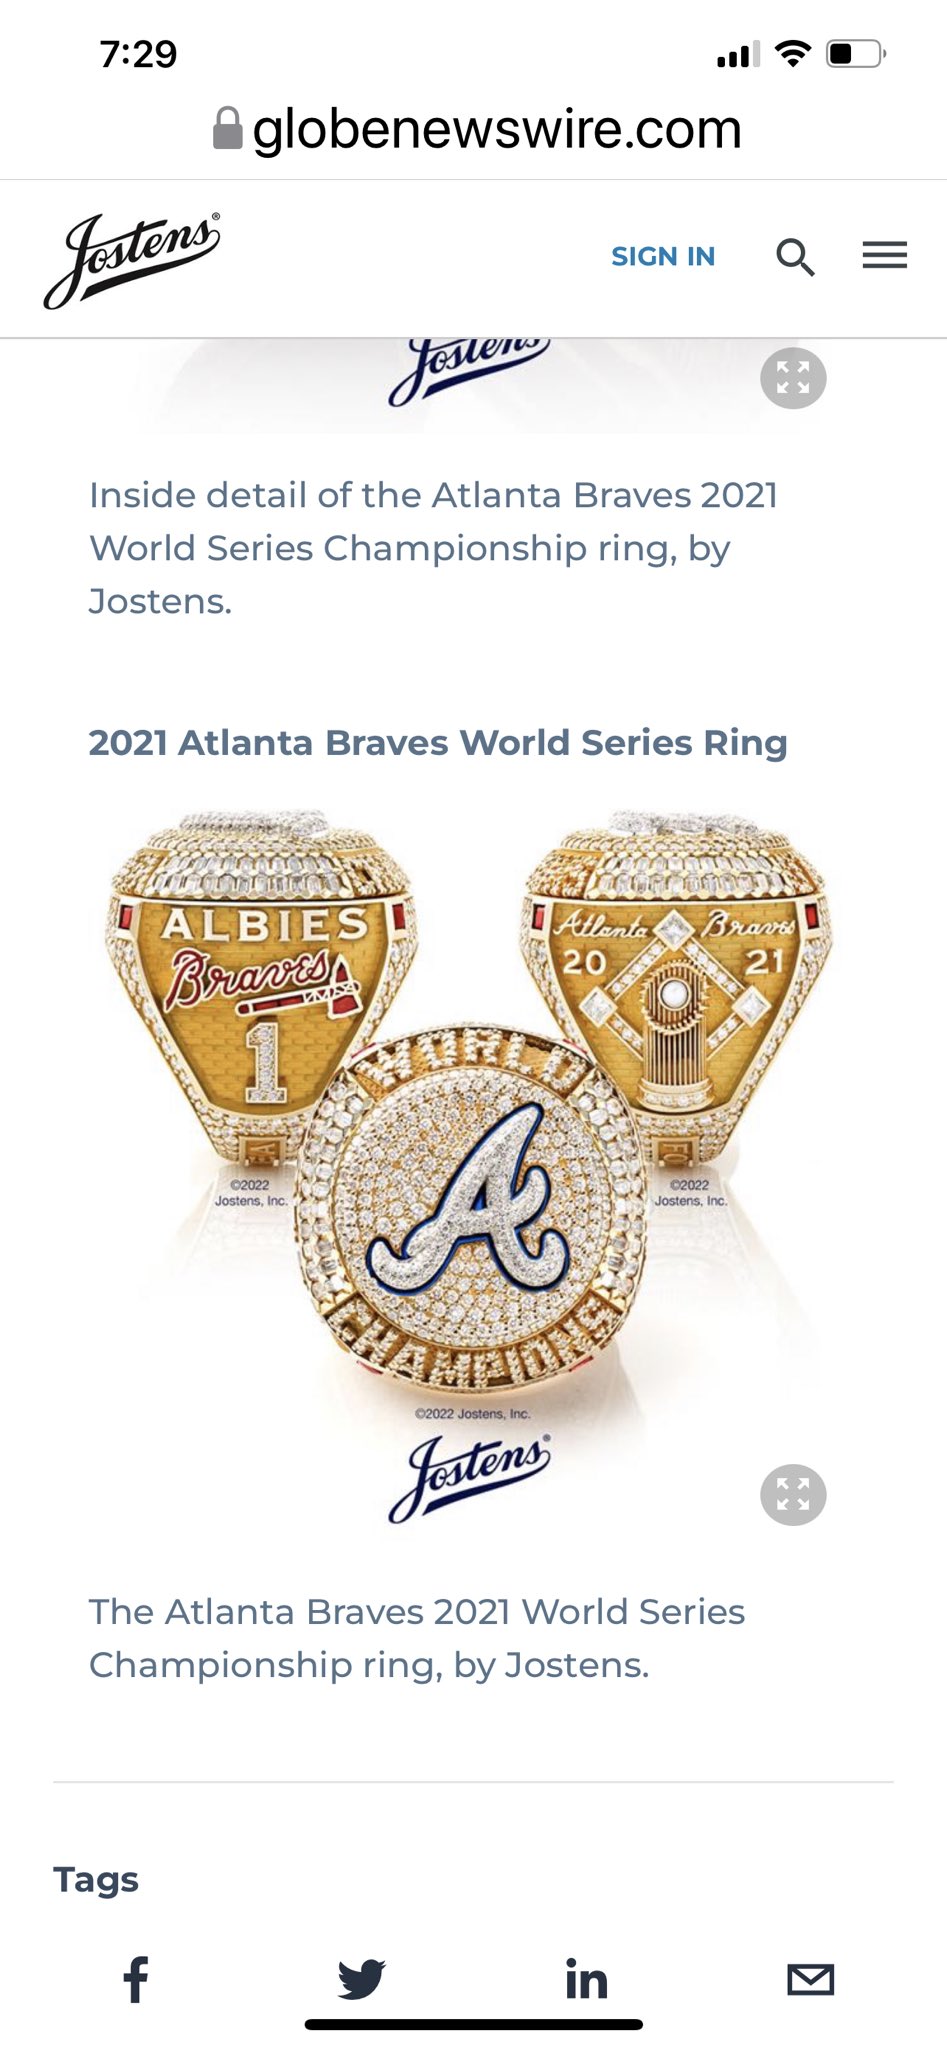 Best Atlanta Braves 1995 World Series Ring for sale in McDonough, Georgia  for 2024